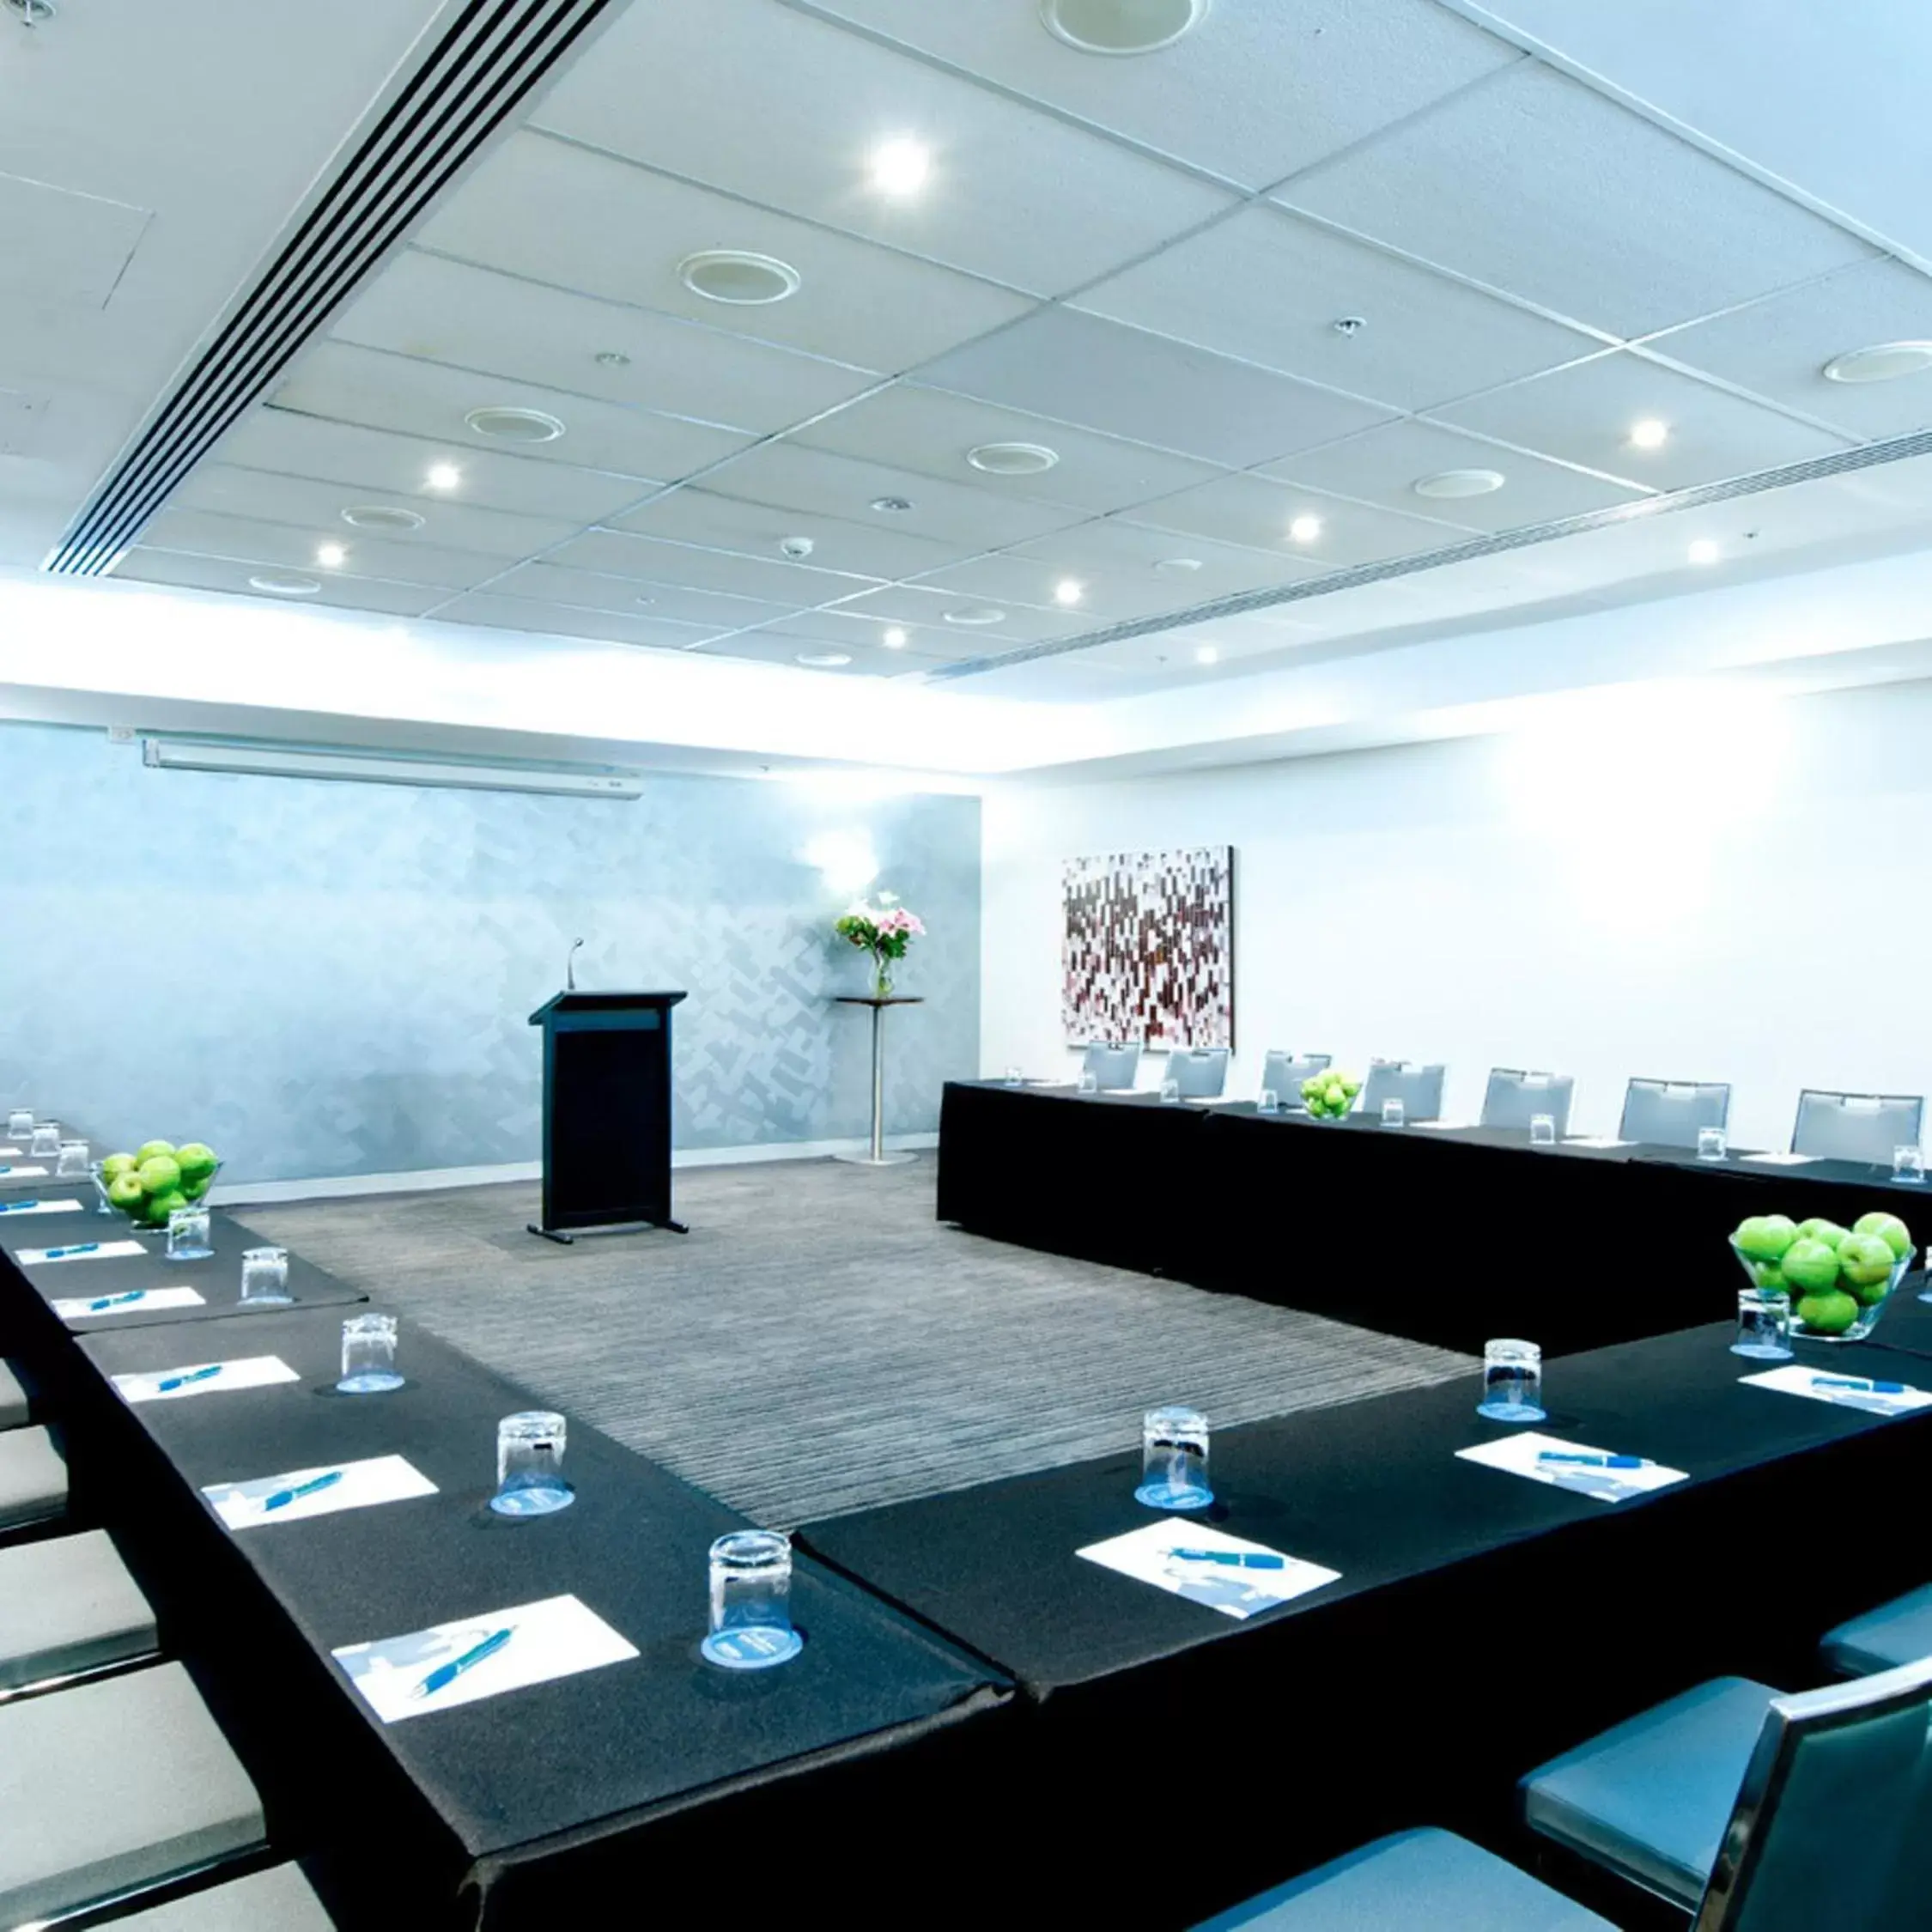 Business facilities in Mantra Chatswood